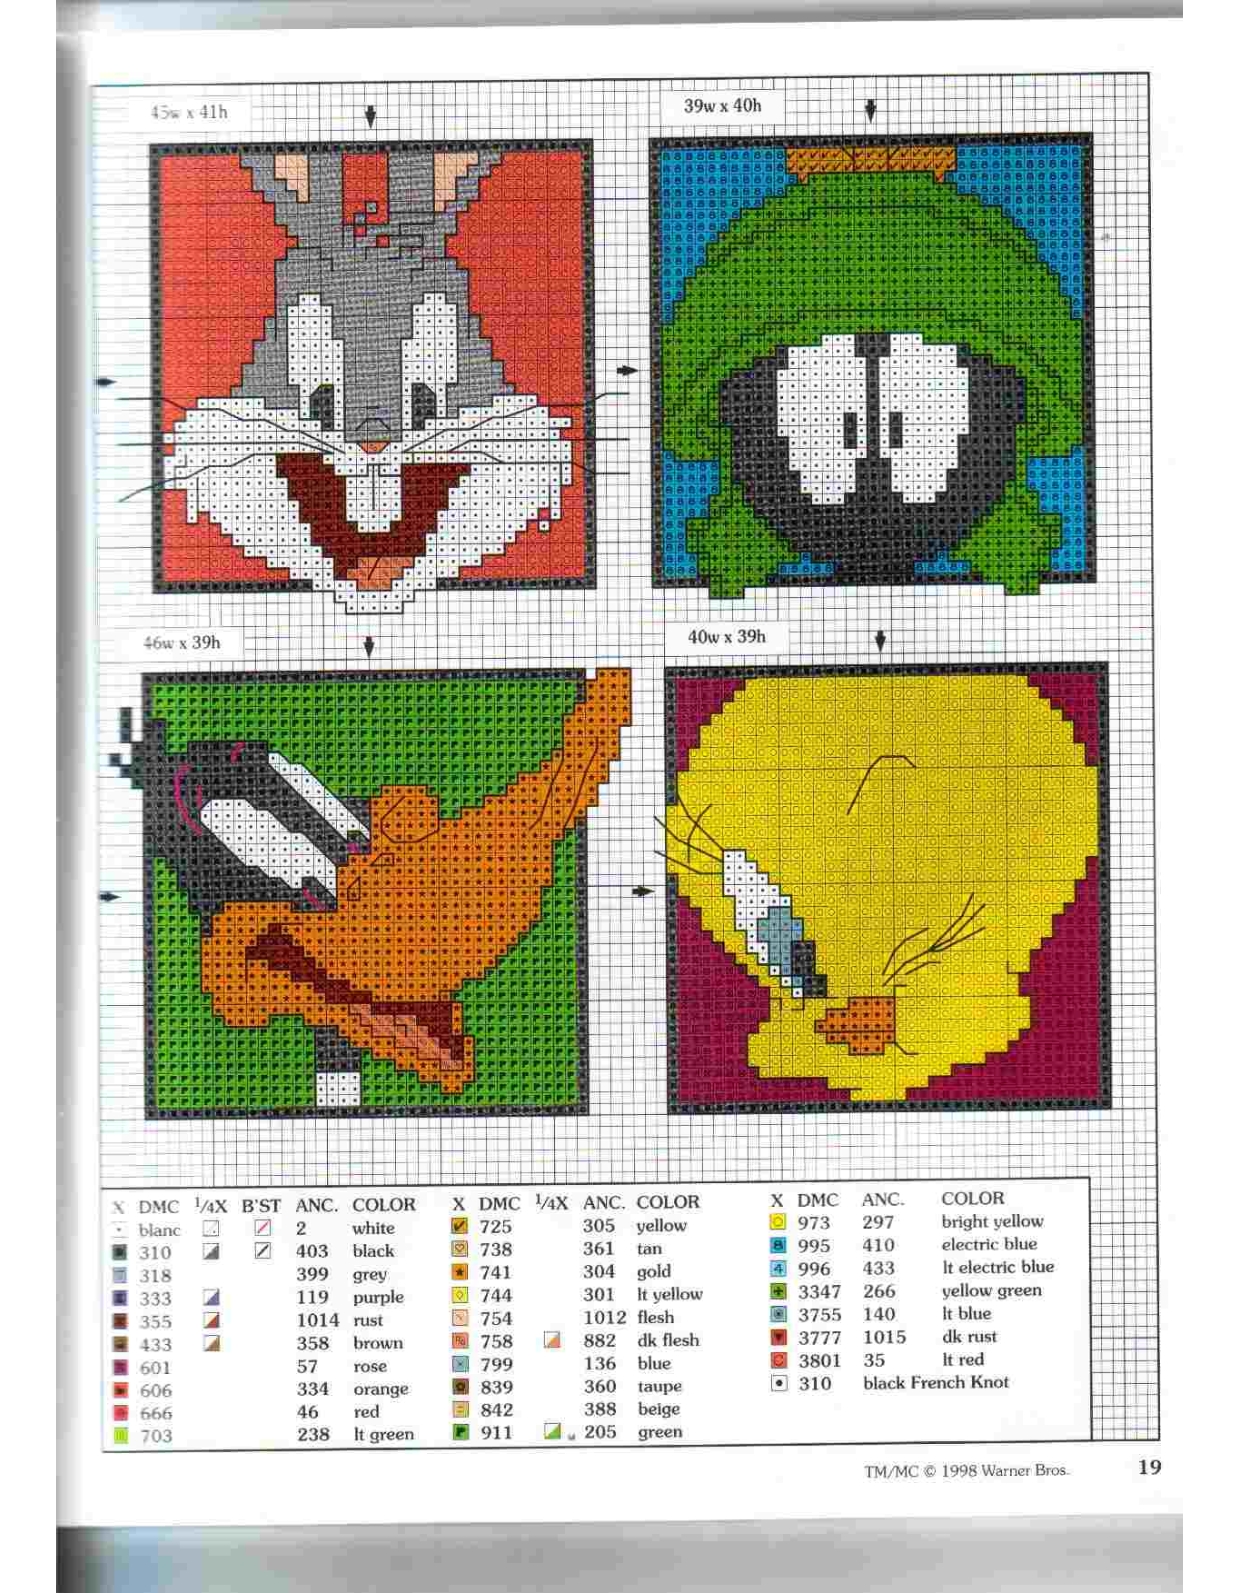 Cross stitch squares with Bugs Bunny Marvin The Matian Daffy Duck and Tweety (1)